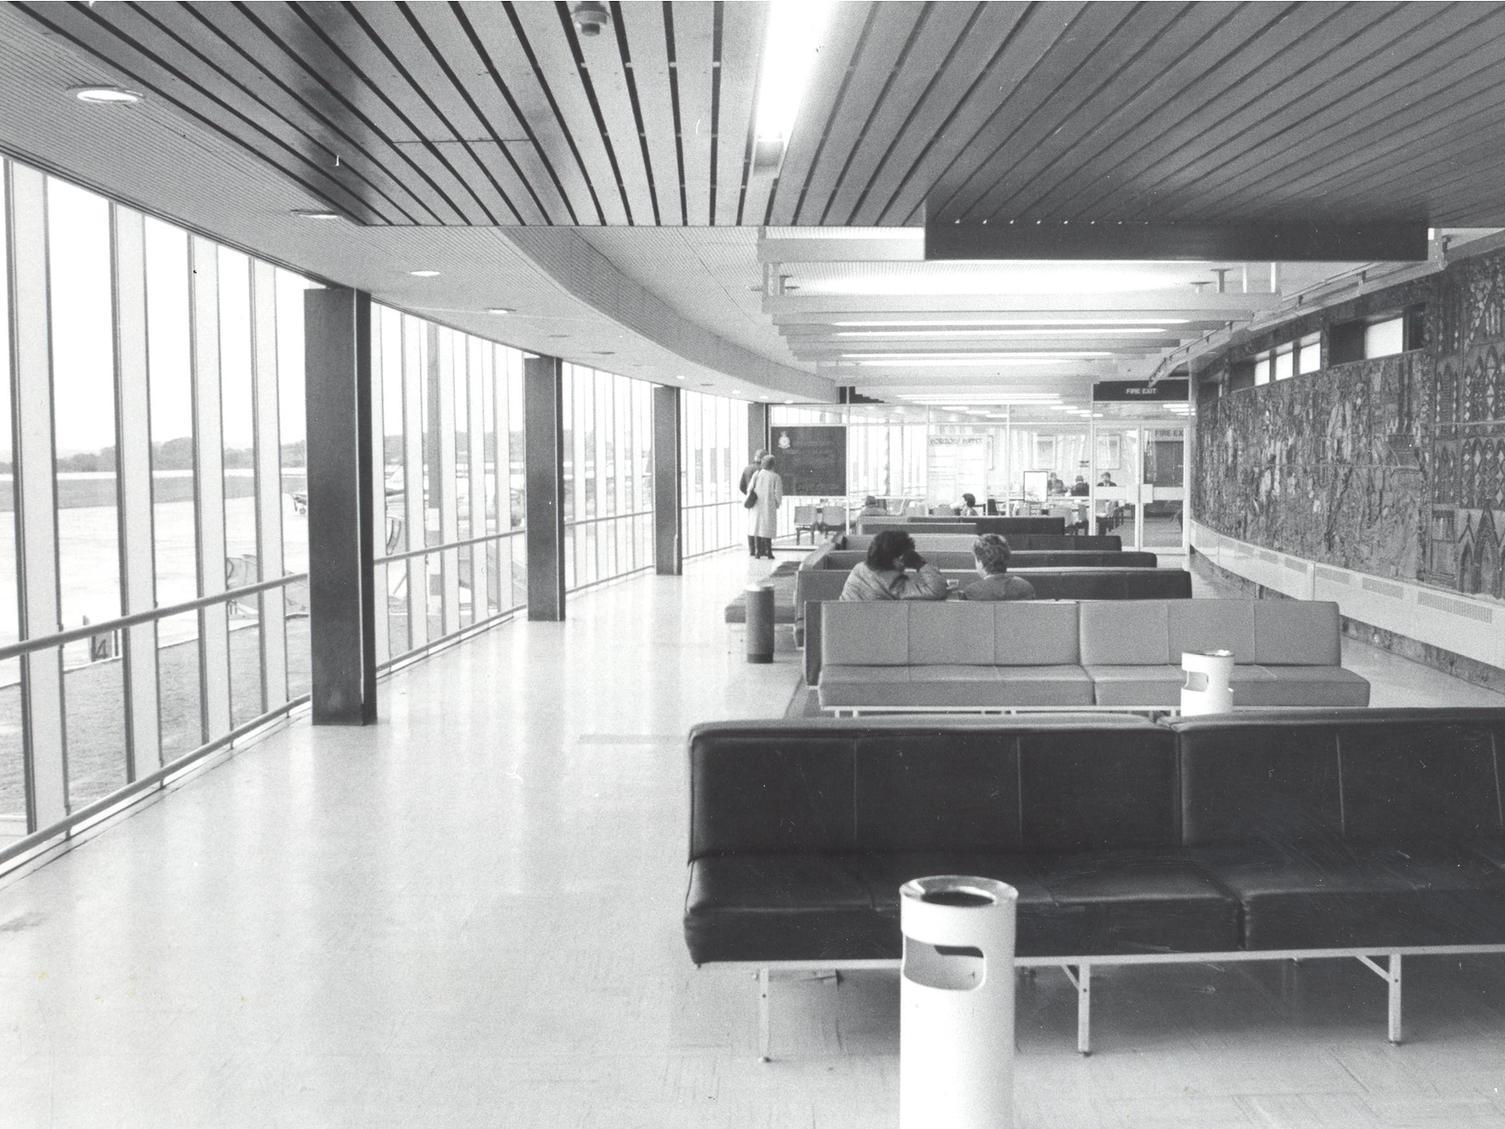 The first floor lounge at Leeds Bradford. Have you noticed how quiet it is?